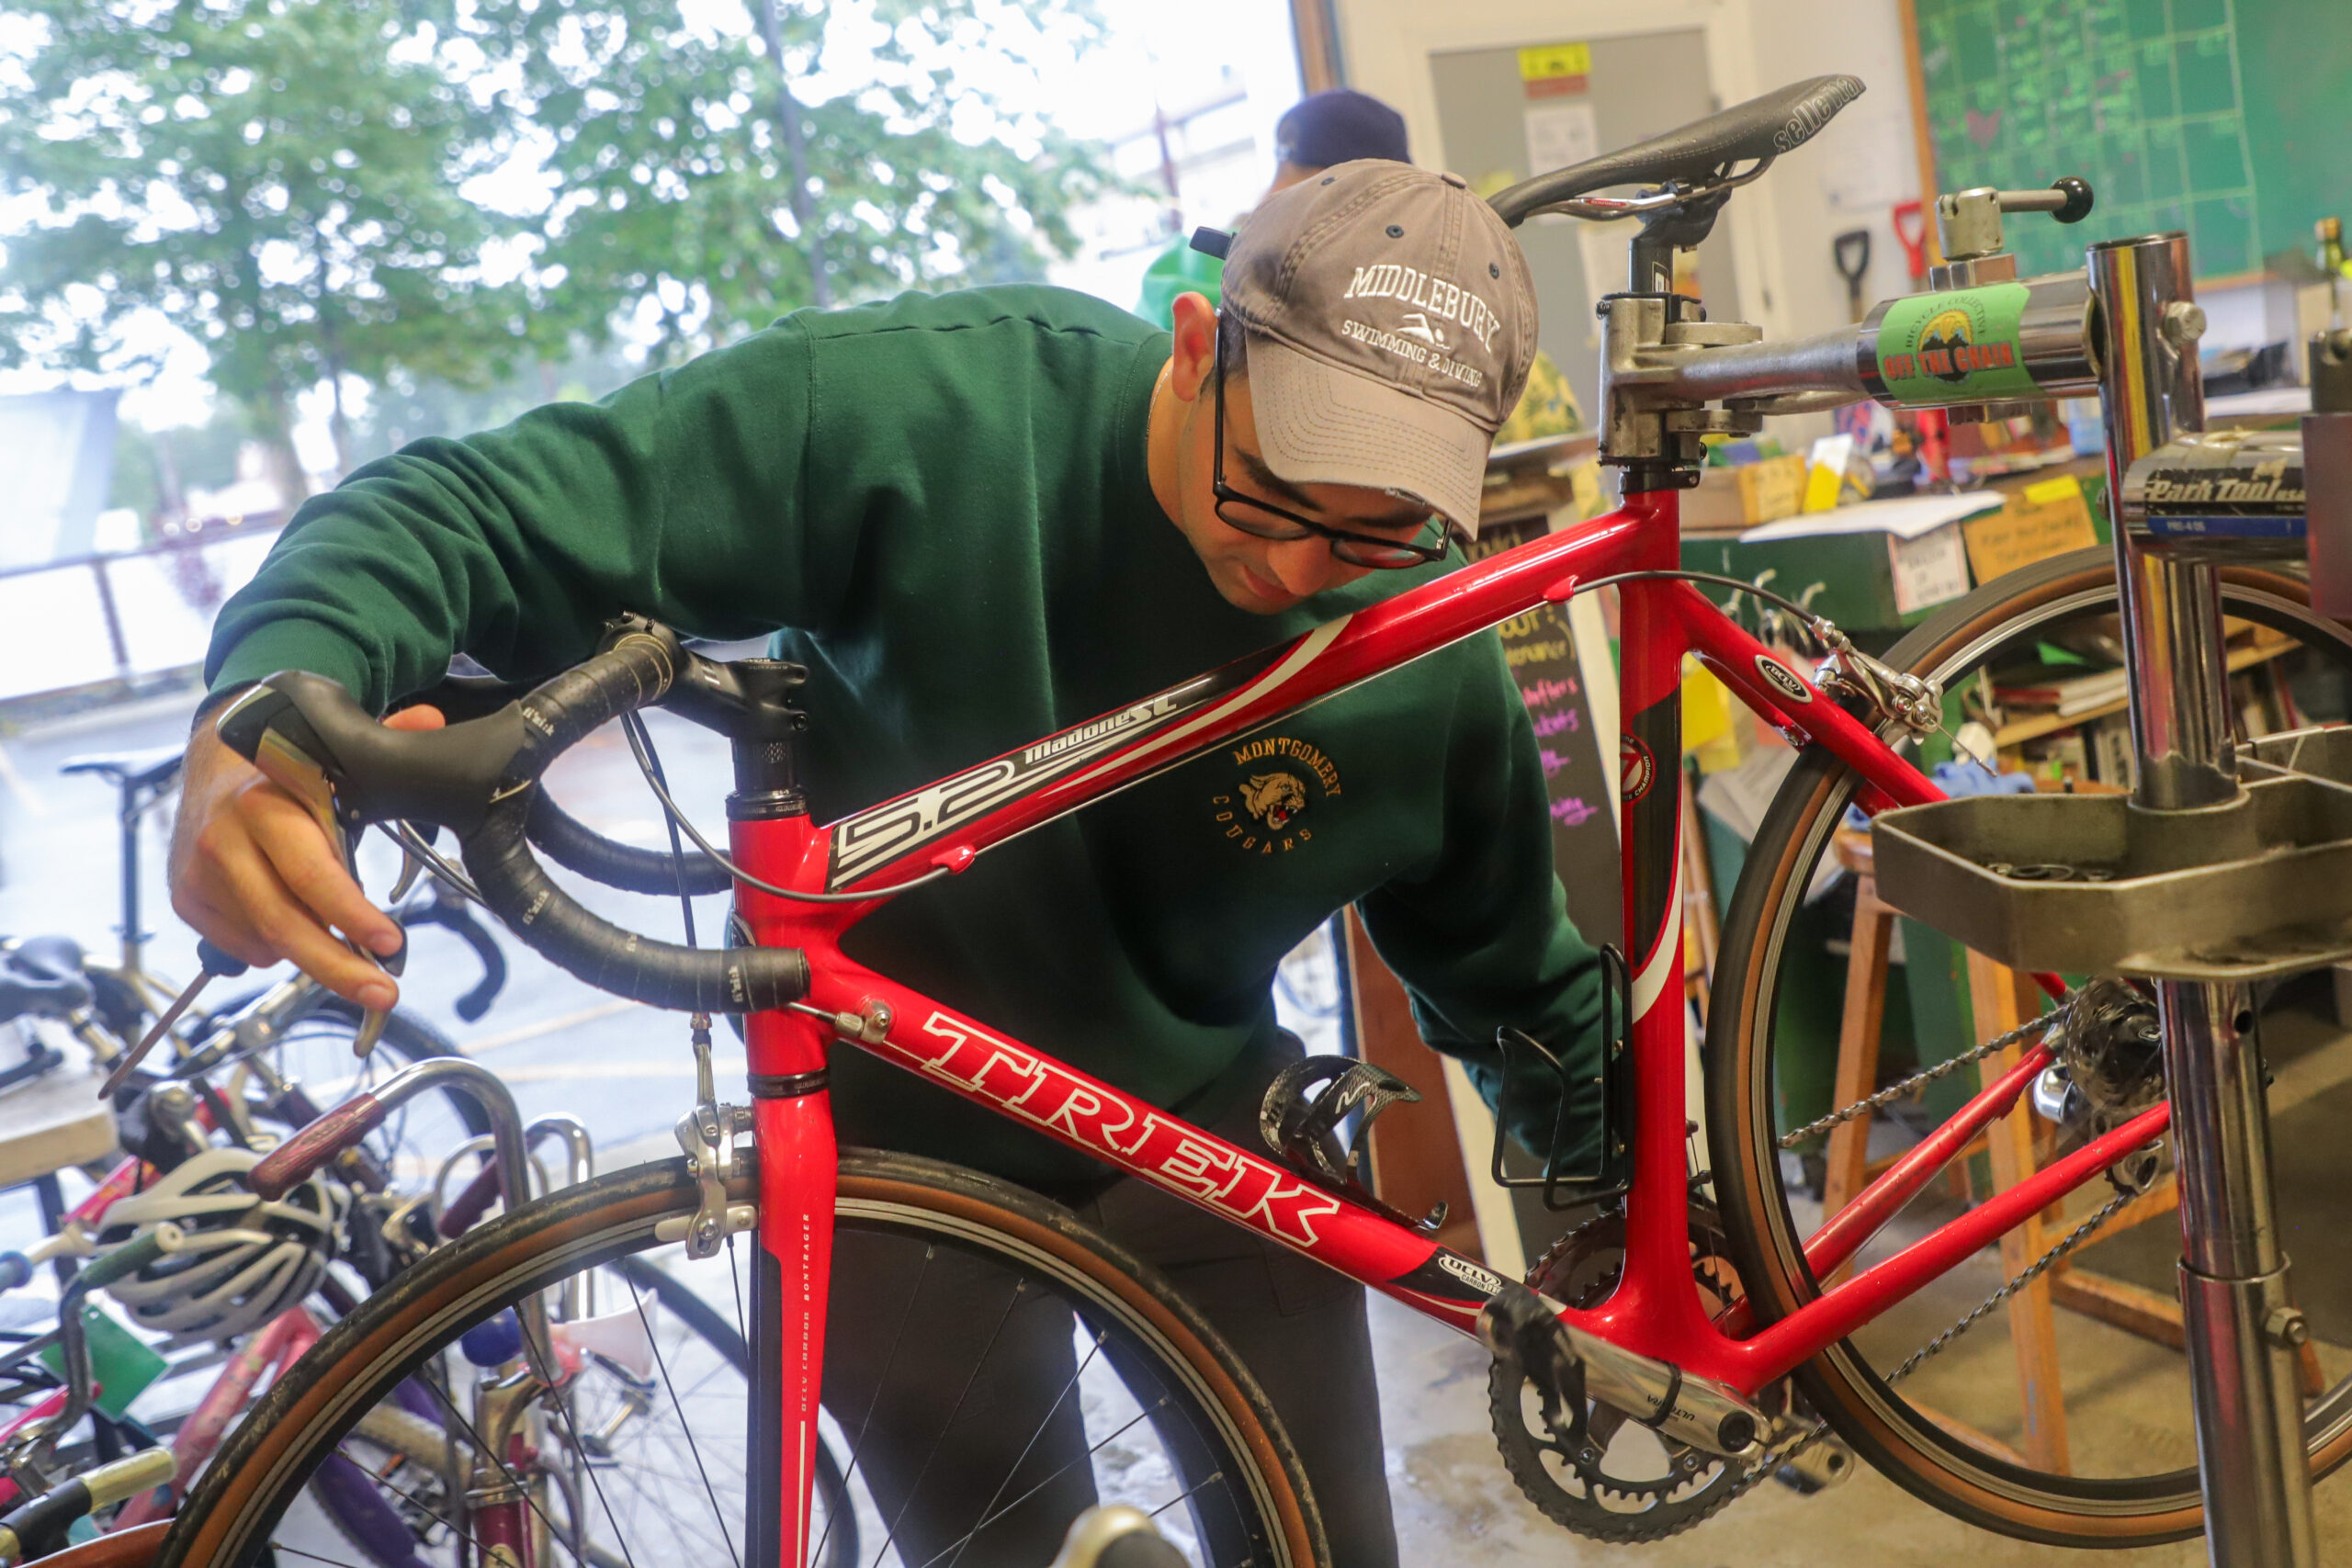 Volunteers at this Anchorage repair shop wont fix your bike for you, but they will show you how